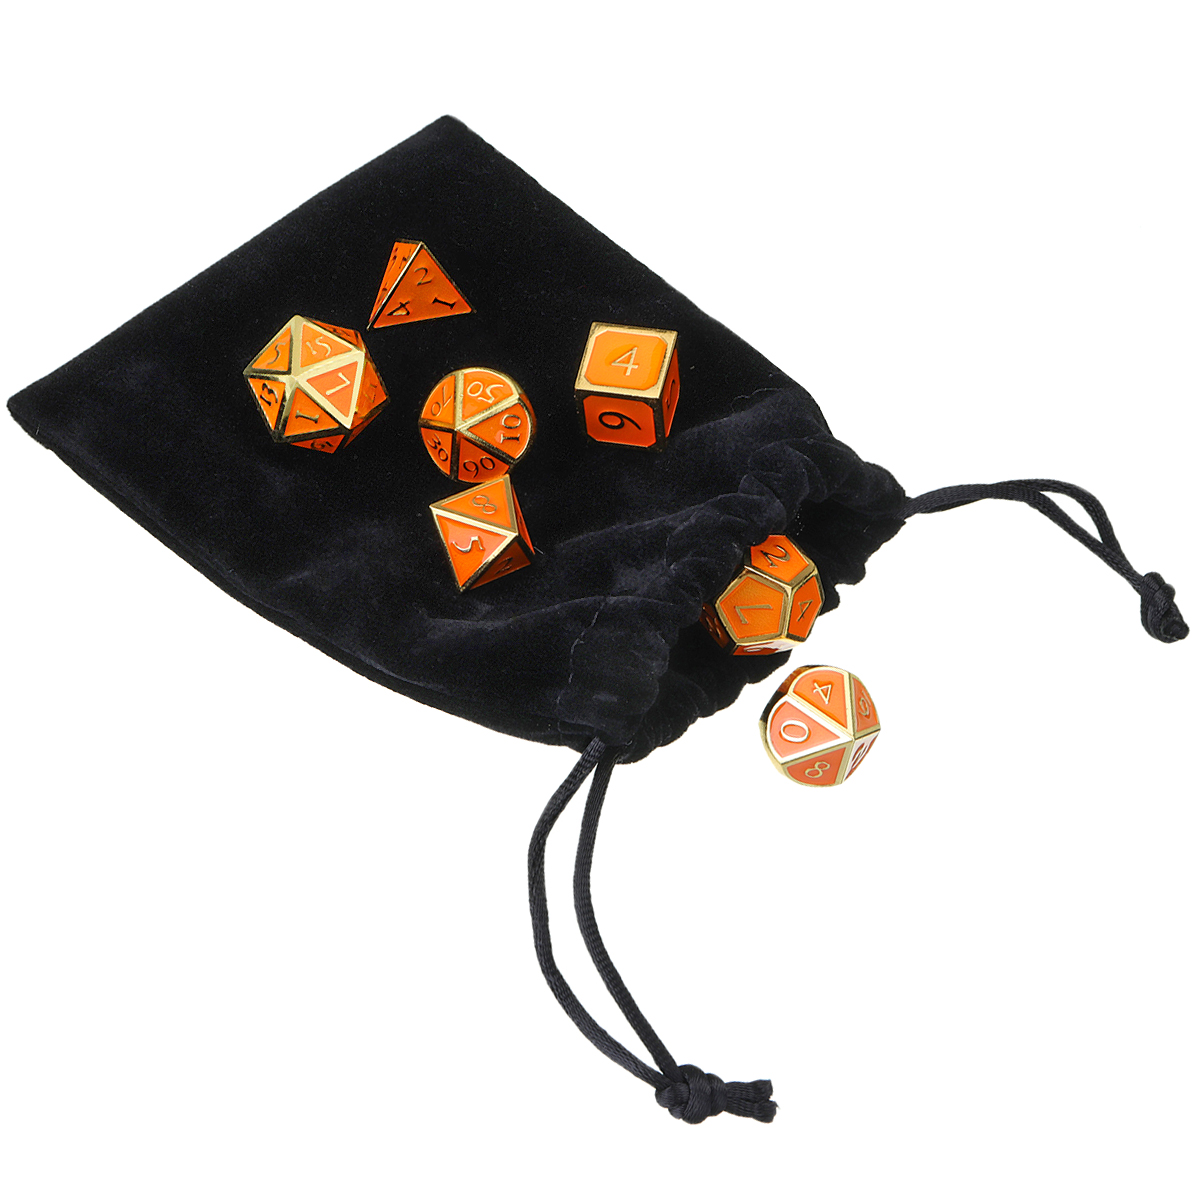 Solid-Metal-Heavy-Dice-Set-Polyhedral-Dices-Role-Playing-Games-Dice-Gadget-RPG-1391317-8